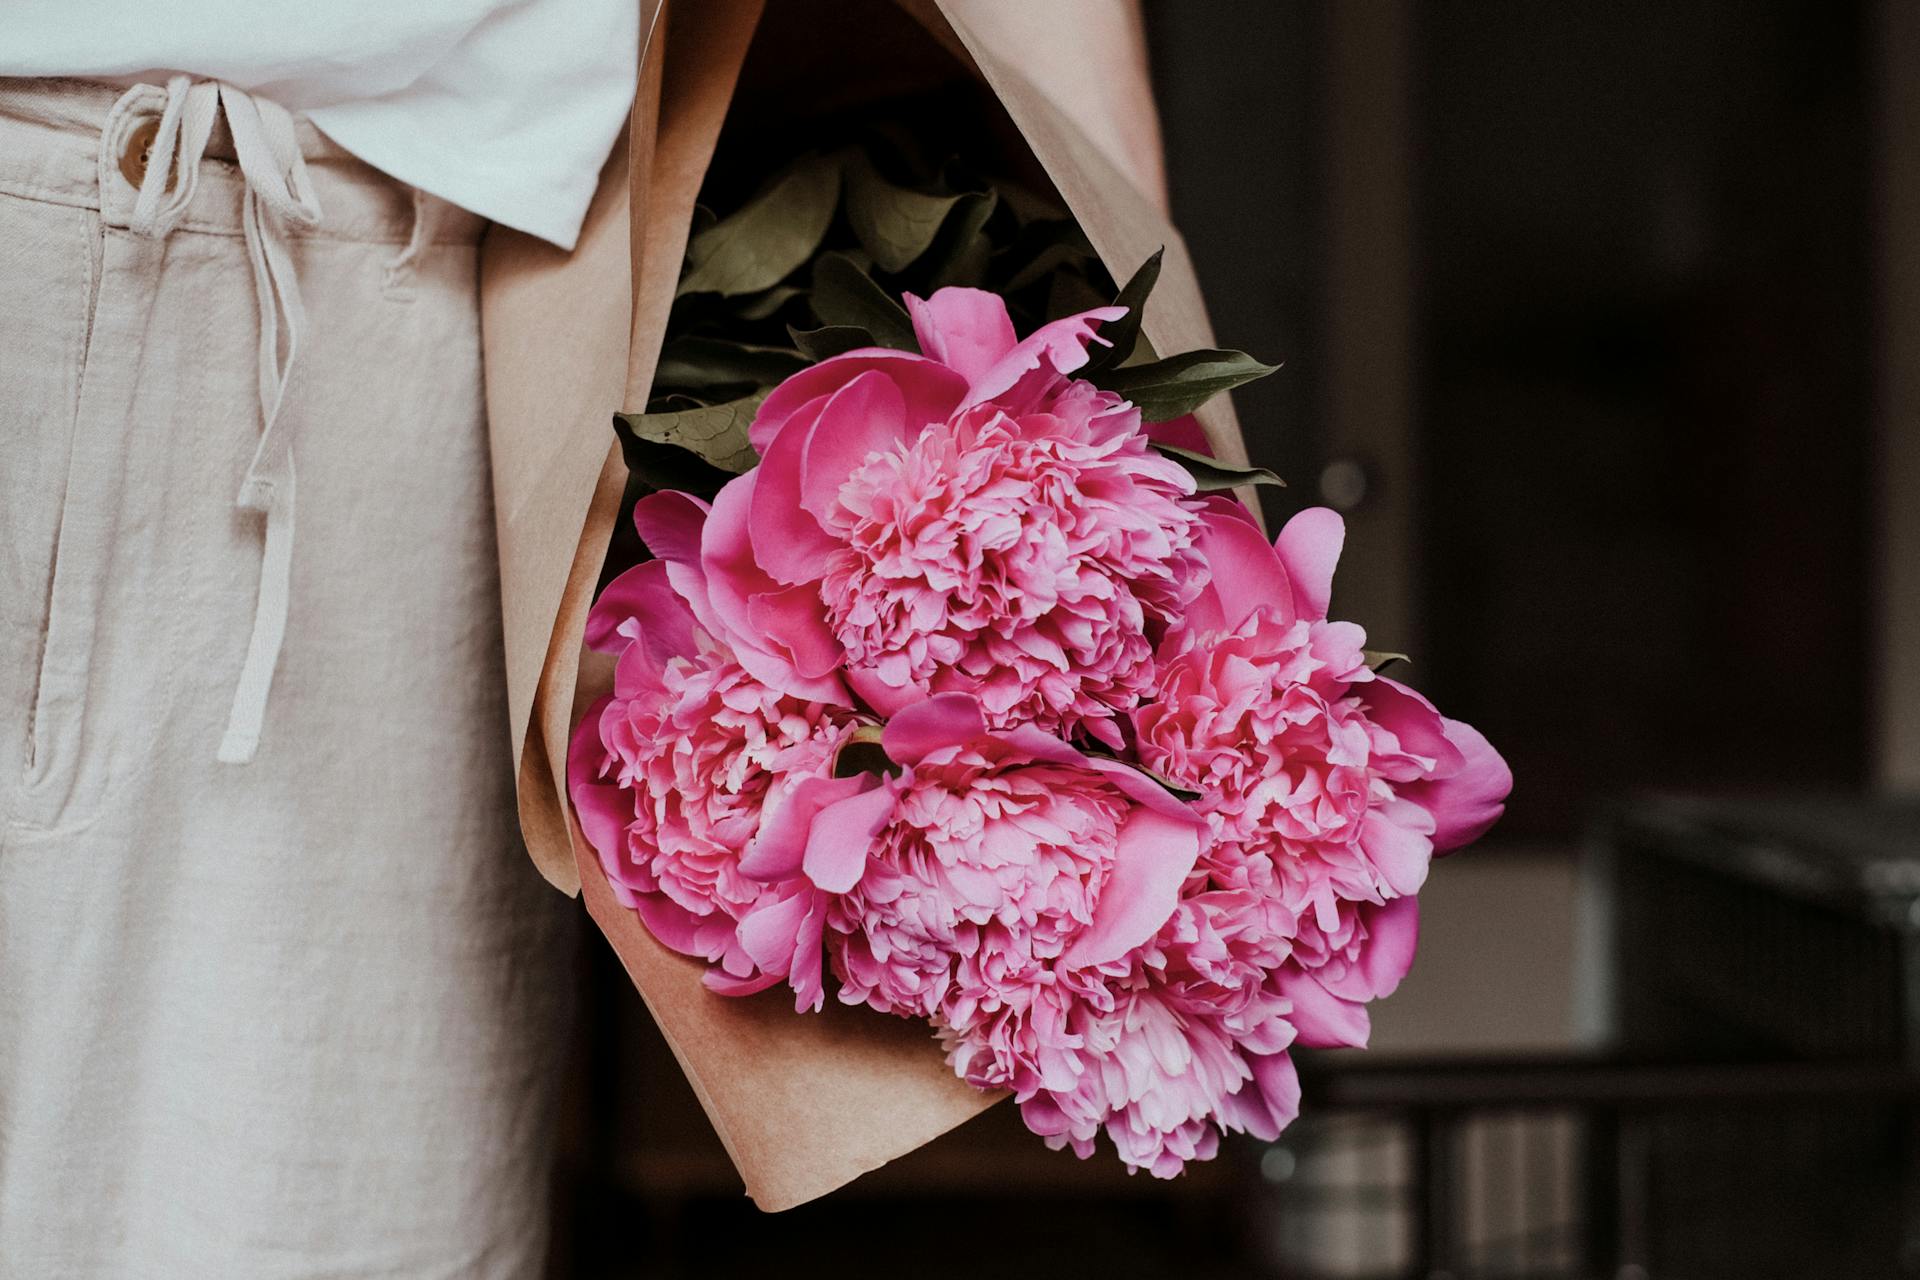 A woman holding a peony bouquet | Source: Pexels